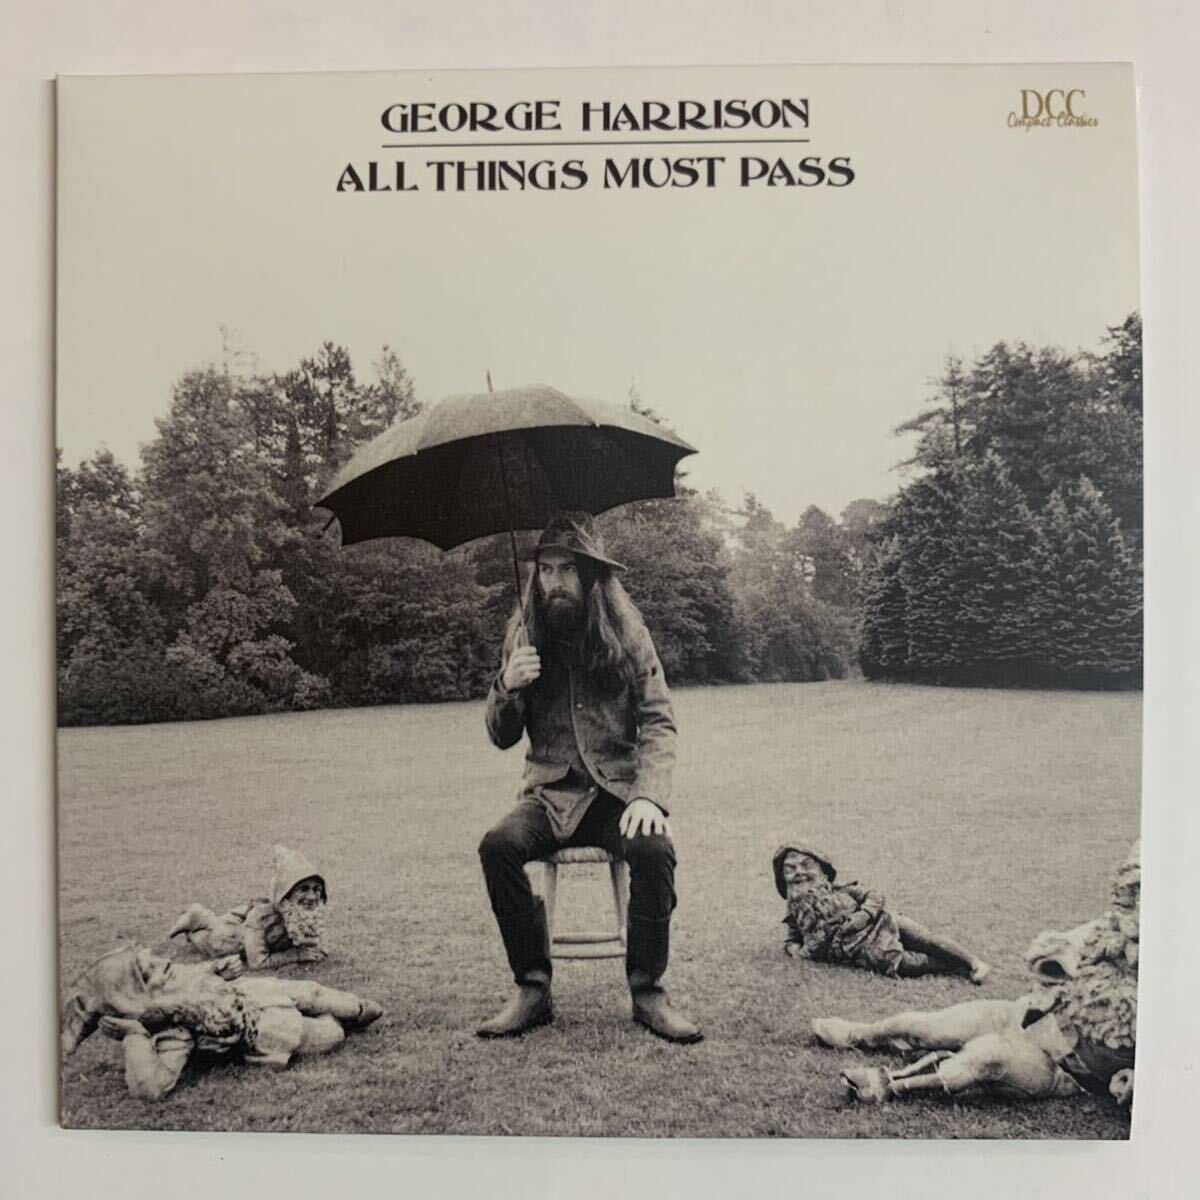 GEORGE HARRISON / ALL THINGS MUST PASS DCC COMPACT CLASSICS Remastered by Steve Hoffman (CD) これは嬉しい紙ジャケット仕様★の画像2